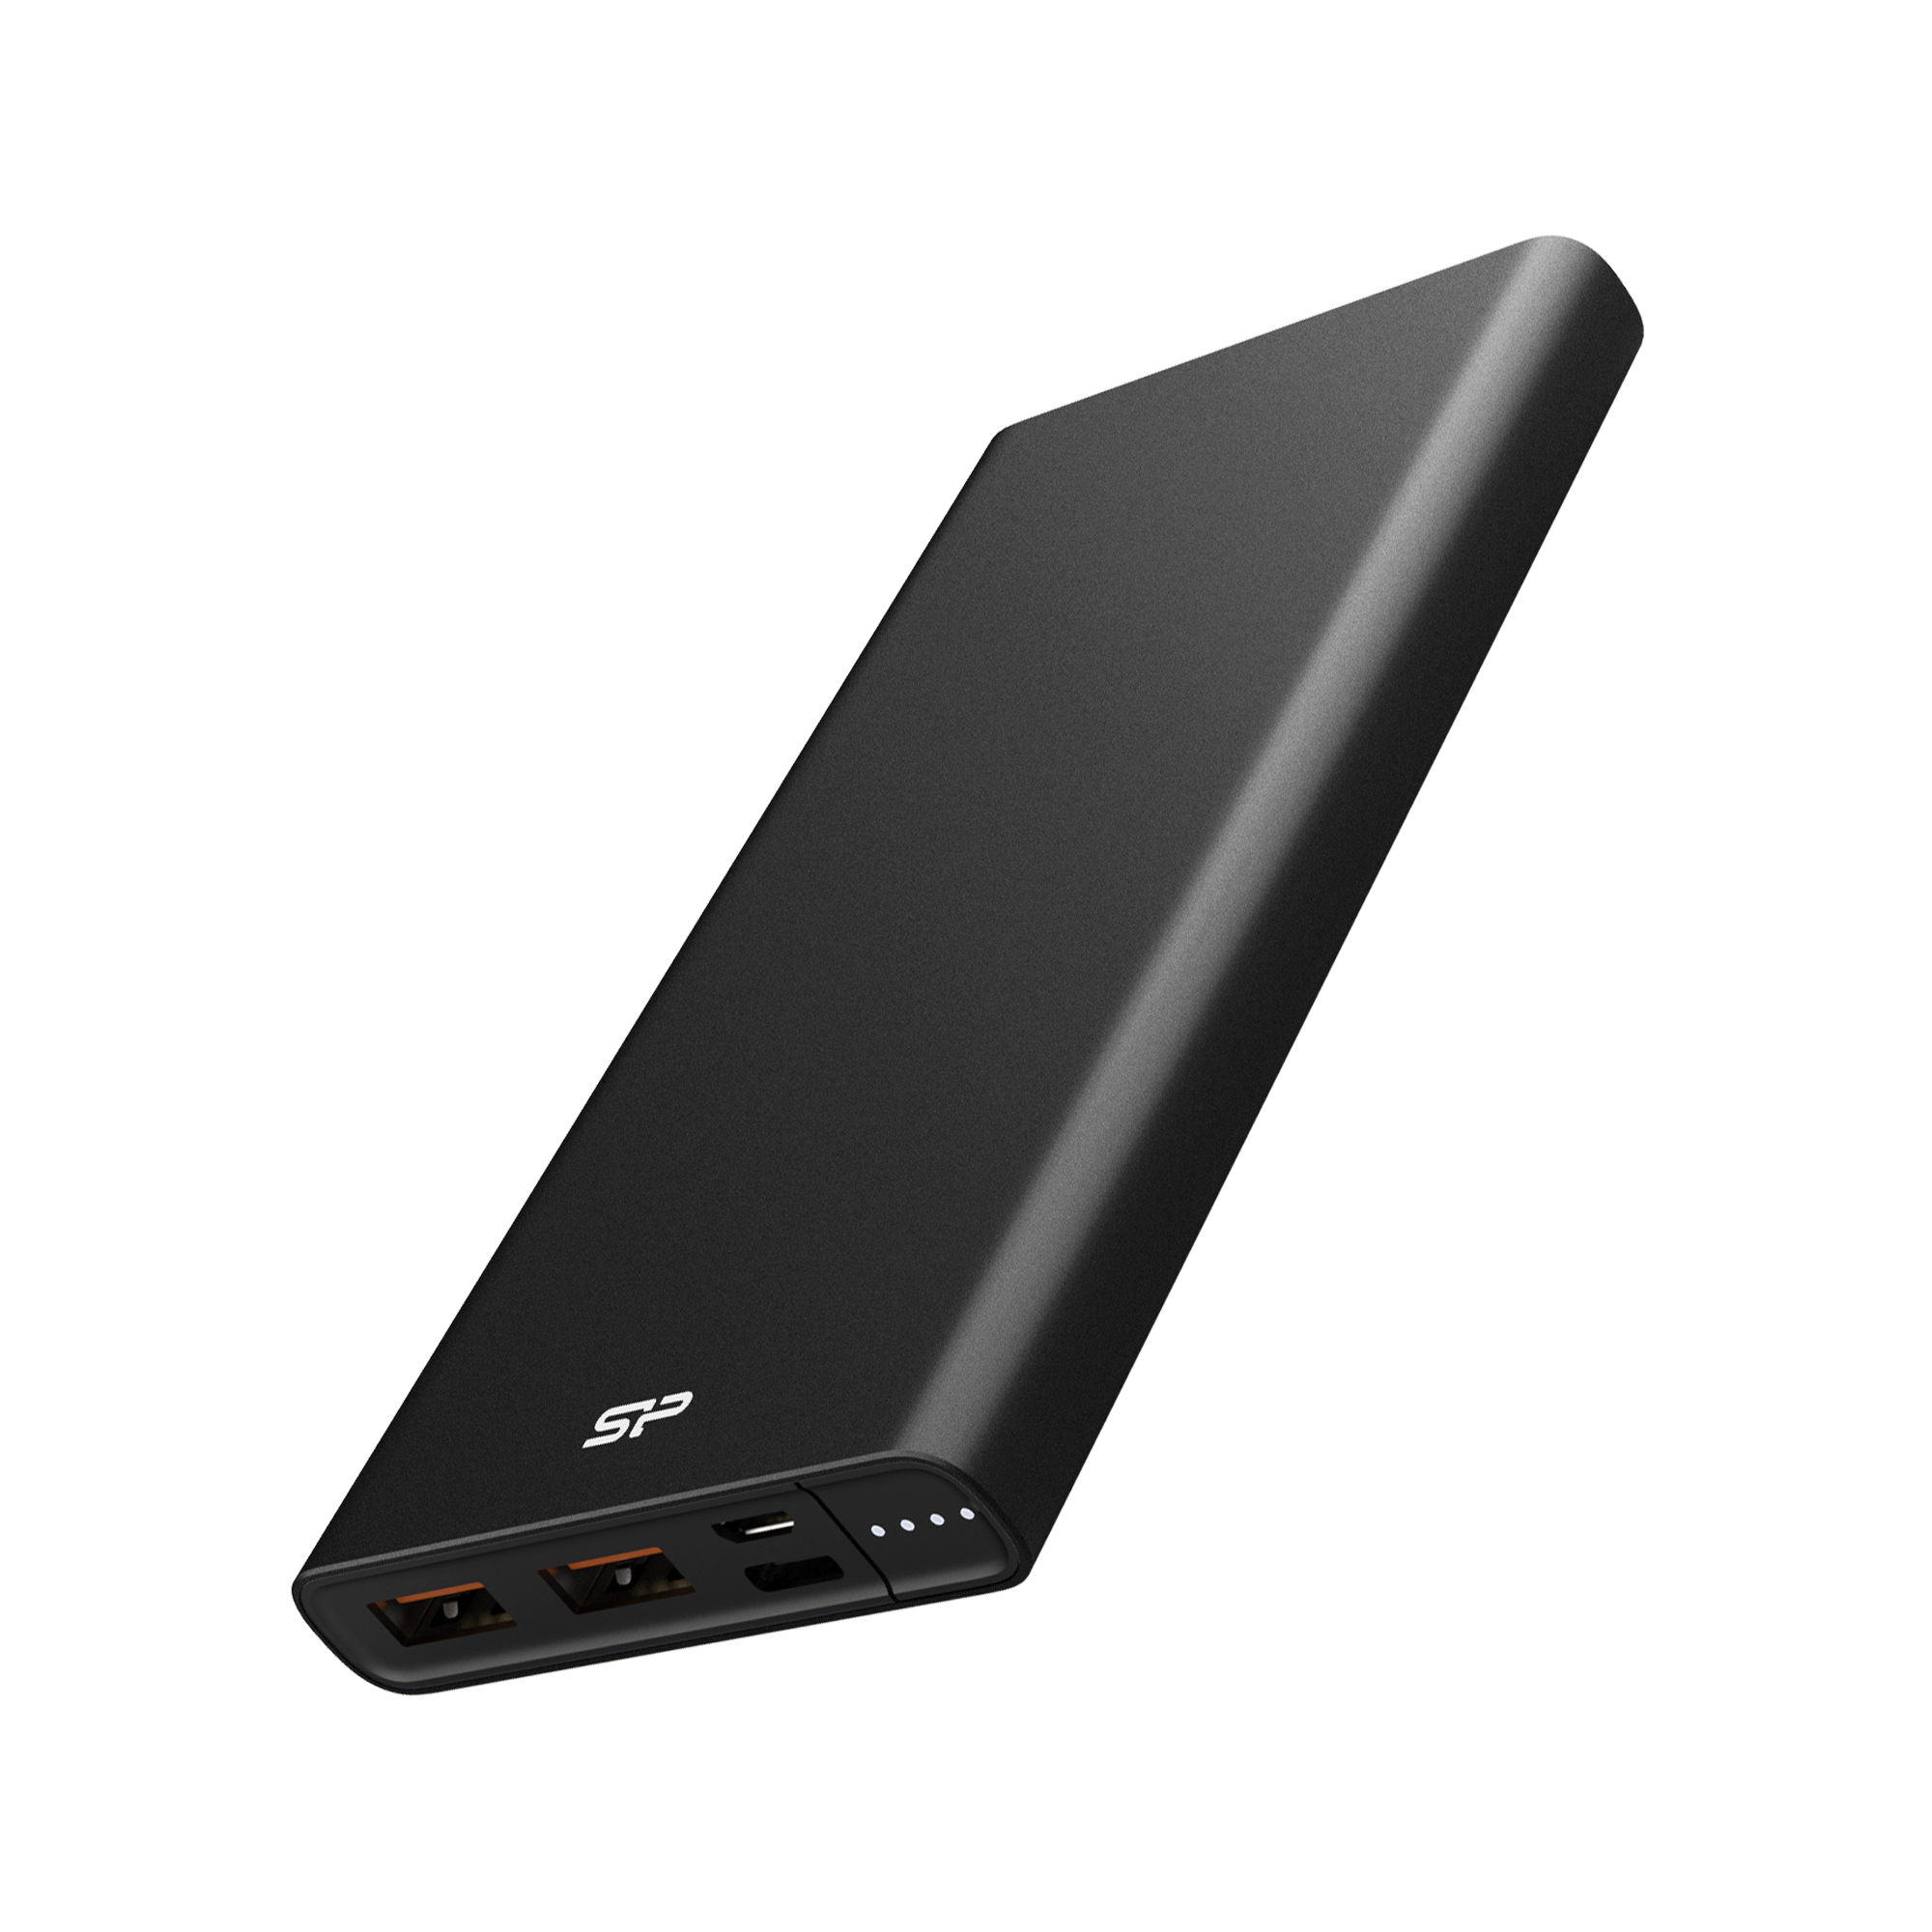 Silicon Power QP60 10000mAh 18W PD & Quick Charge 3.0 Power Bank Portable Charger - Black